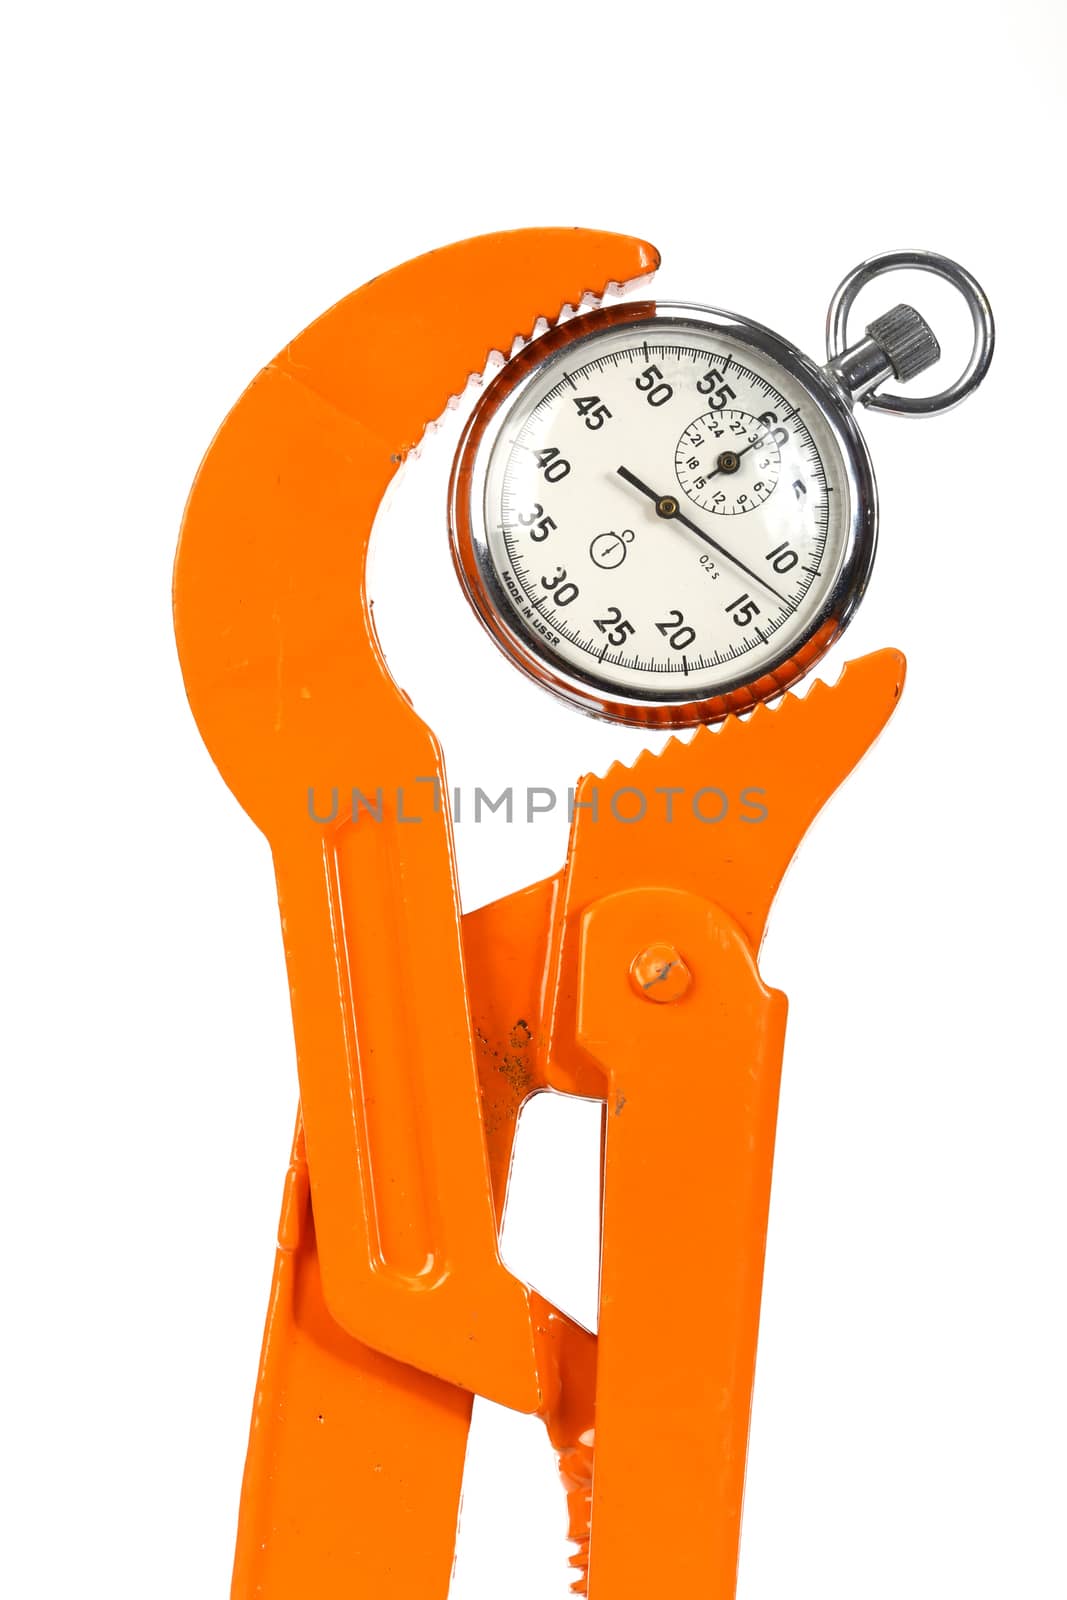 Wrench and stopwatch by alexkosev